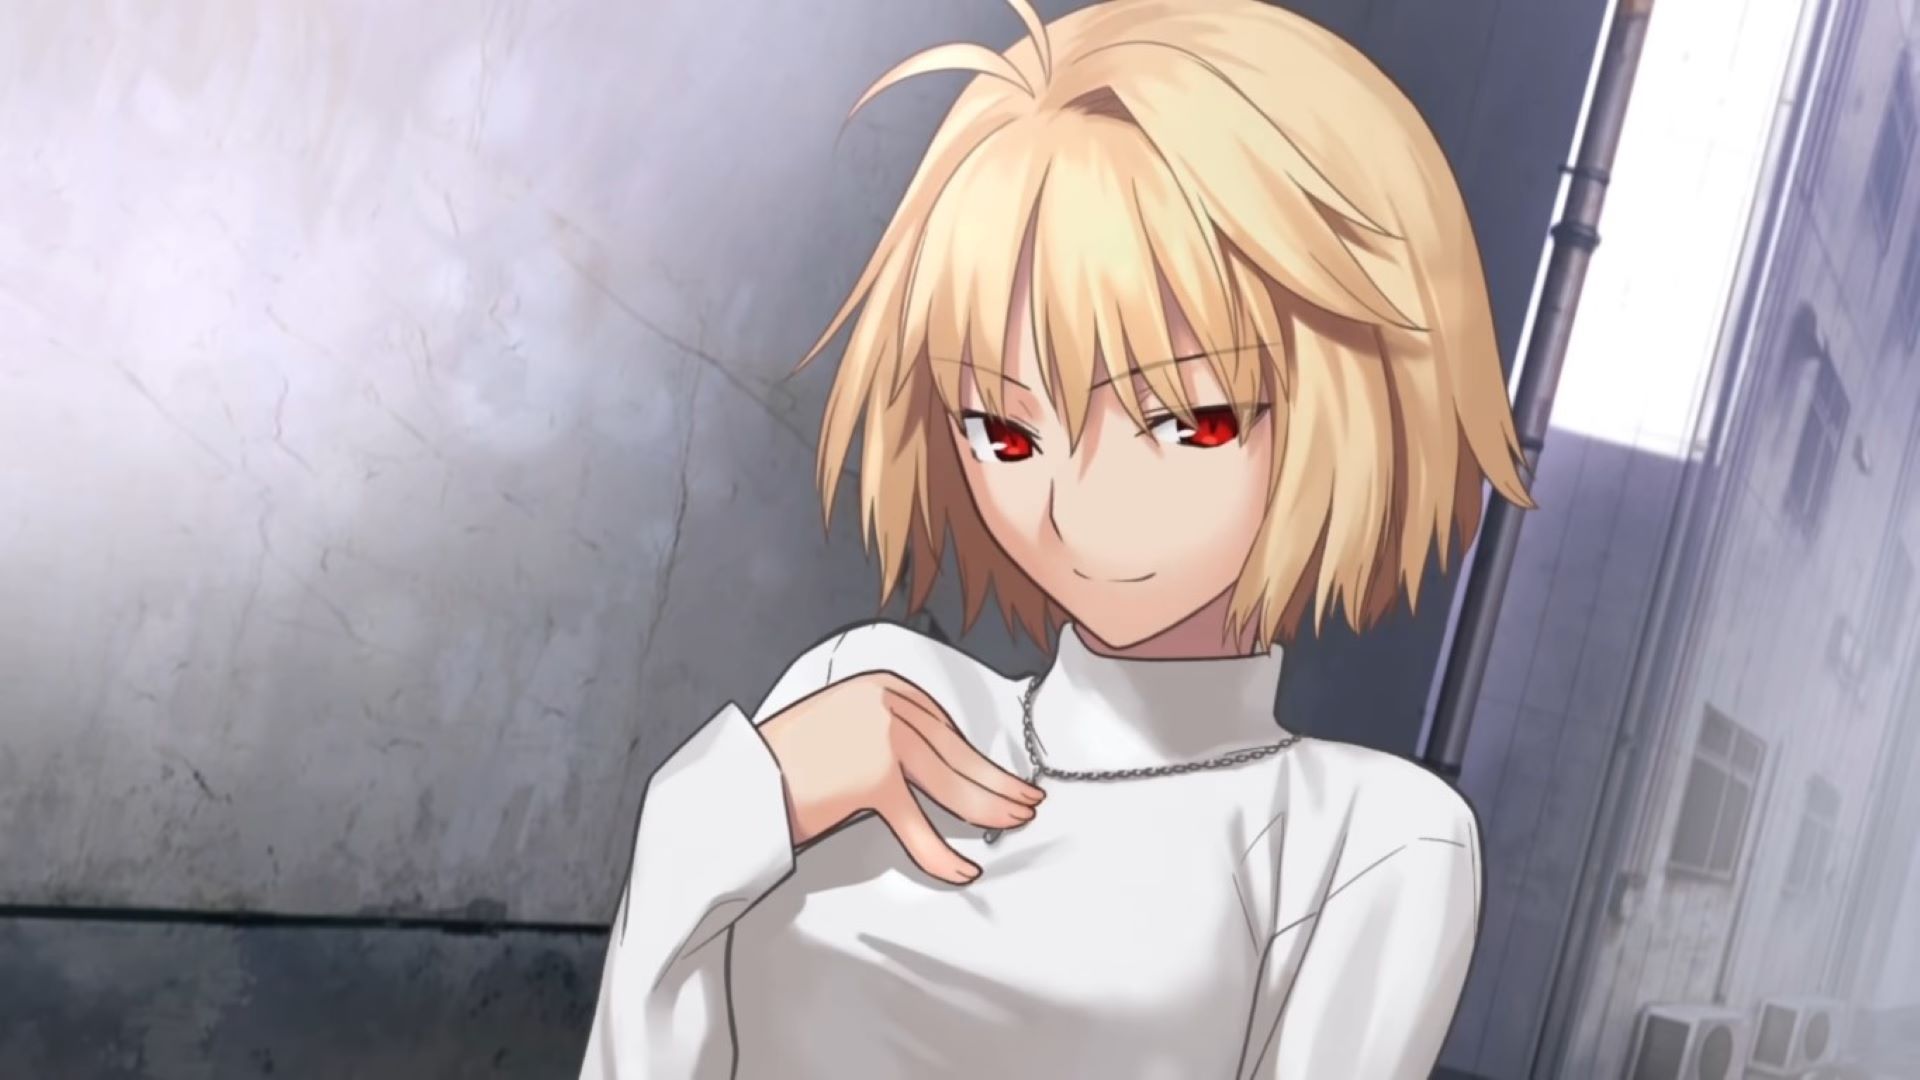 Tsukihime Returns After 21 Years With Help From Ufotable - YouTube